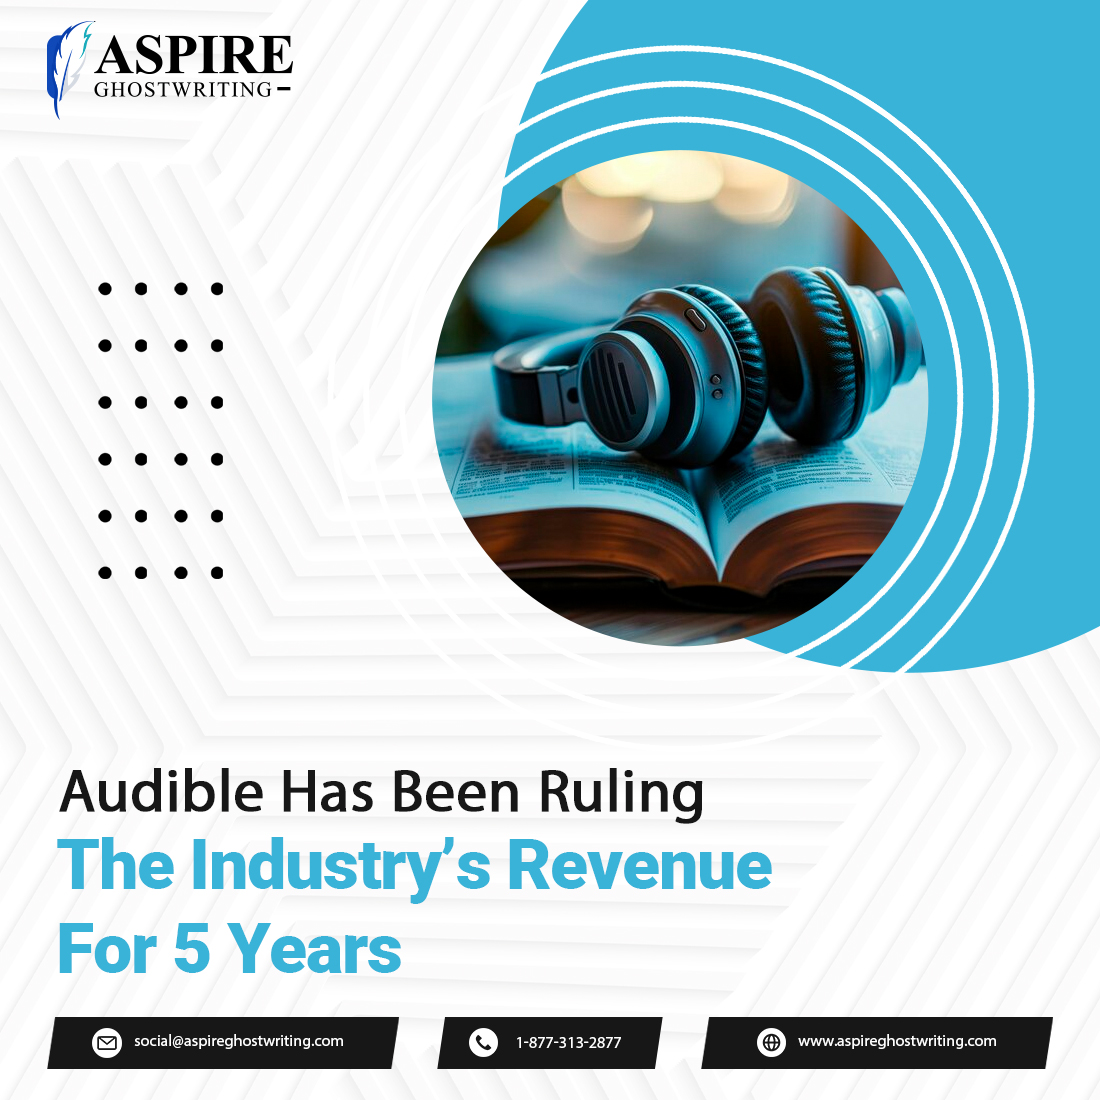 Collaborate with us to publish your audiobooks on Audible and share your tales with the world.

#aspireghostwriting #bookmarketing #bookpublishing #bookcoverdesign #audiobook #audible